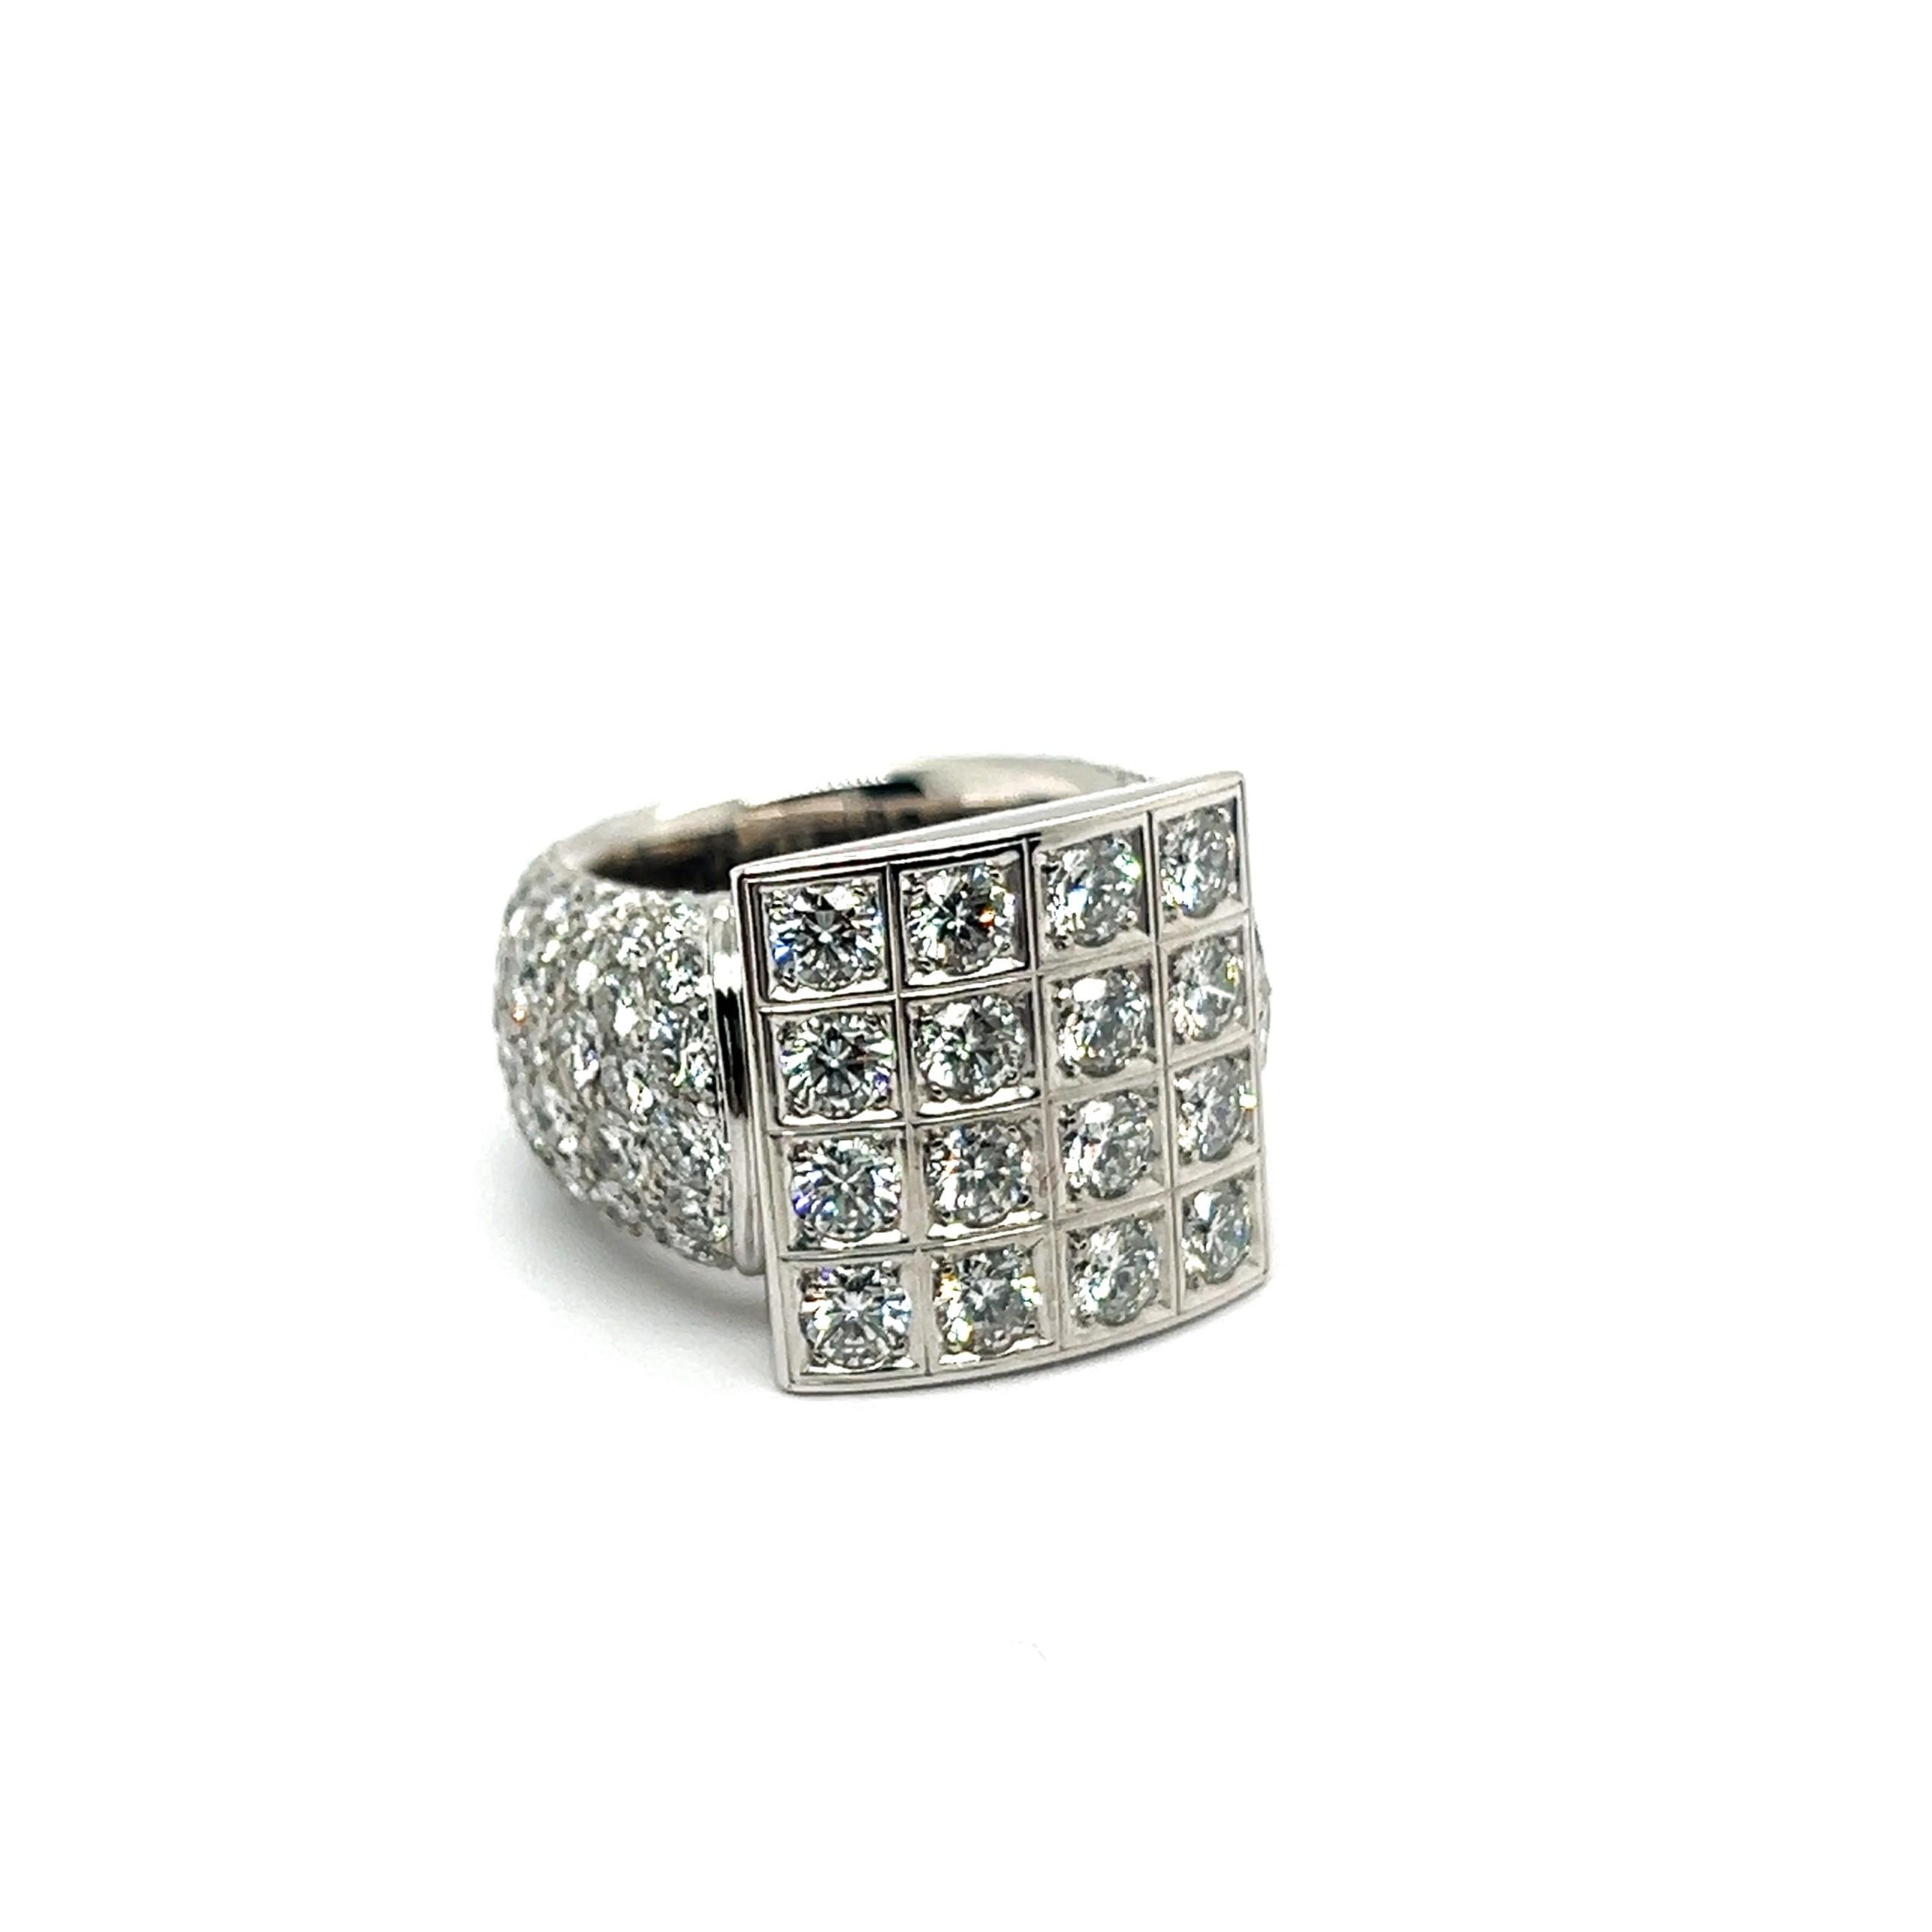 Modern Bold Graphic Ring with Diamonds in 18 Karat White Gold by Majo Fruithof For Sale